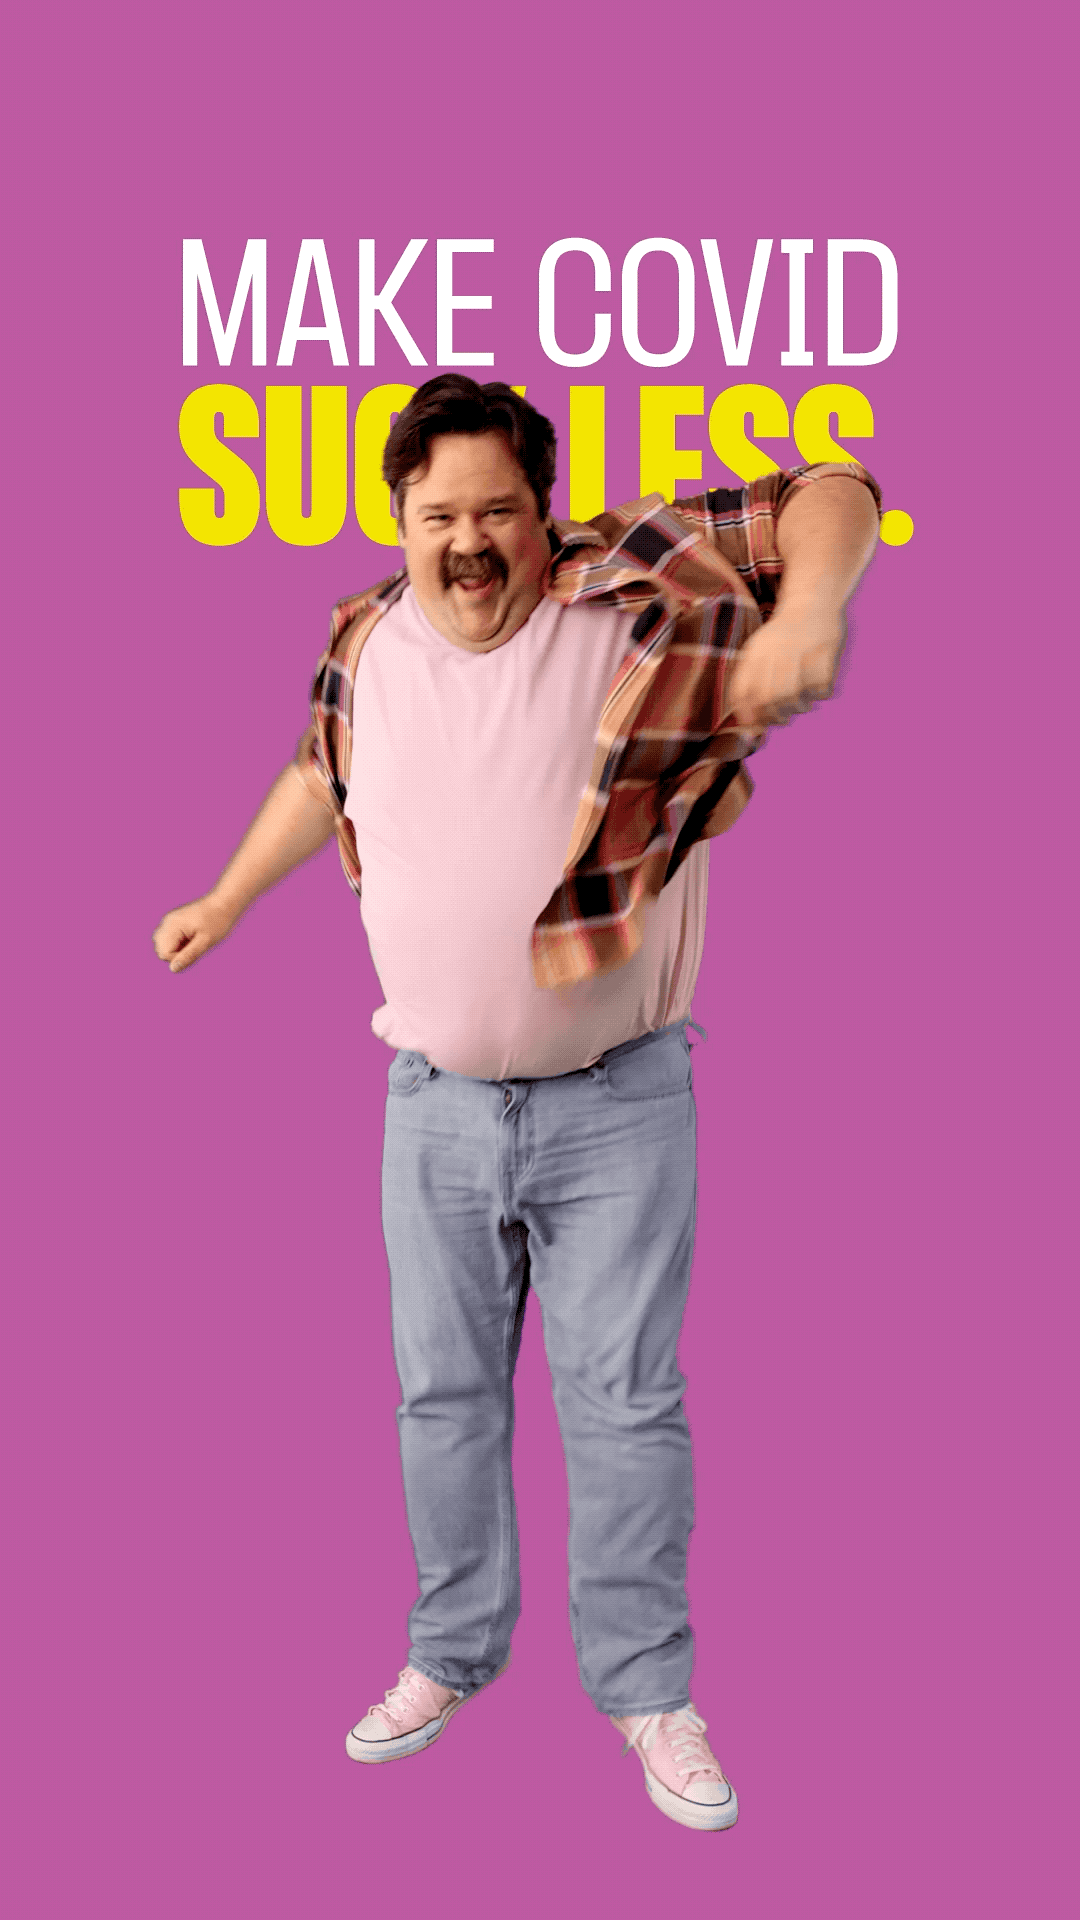 GIF with bright pink background showing a mustached man with a plaid shirt, light pink undershirt and jeans doing a fun pop-and-lick style dance. Copy comes across the screen reading, “Now there’s medication to treat COVID-19. Make COVID suck less